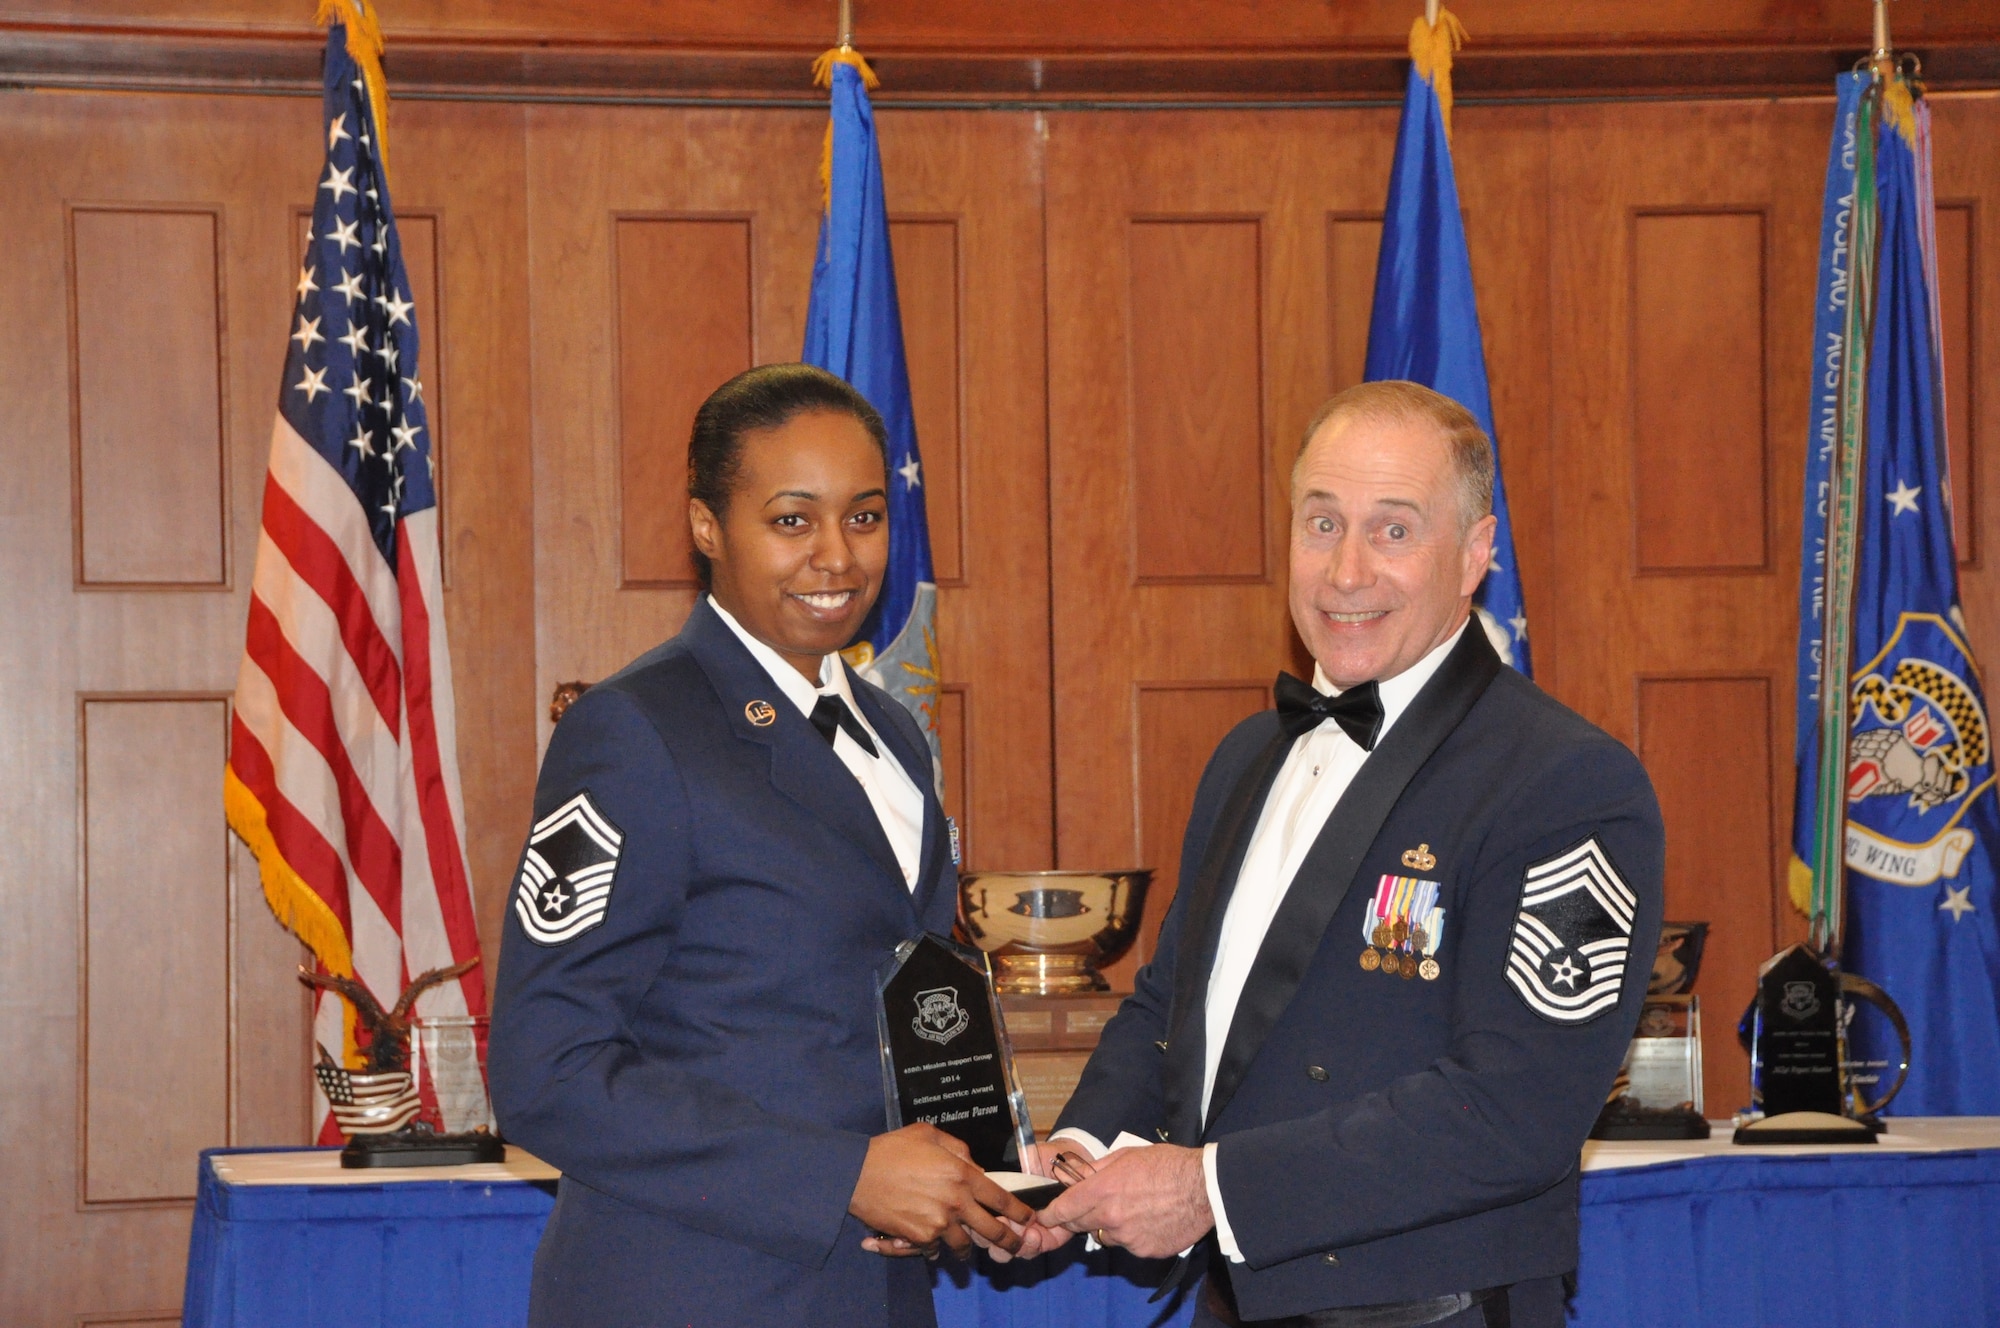 Chief Master Sergeant Keith Cockey, 459th Mission Support Group, presents the 459 MSG Selfless Service Award to Master Sgt. Shaleen Parson, 459th Force Support Squadron, at the 459 ARW Annual Awards Banquet on Saturday, March 7, 2015. (Air Force Photo / SrA Kristin Kurtz)
